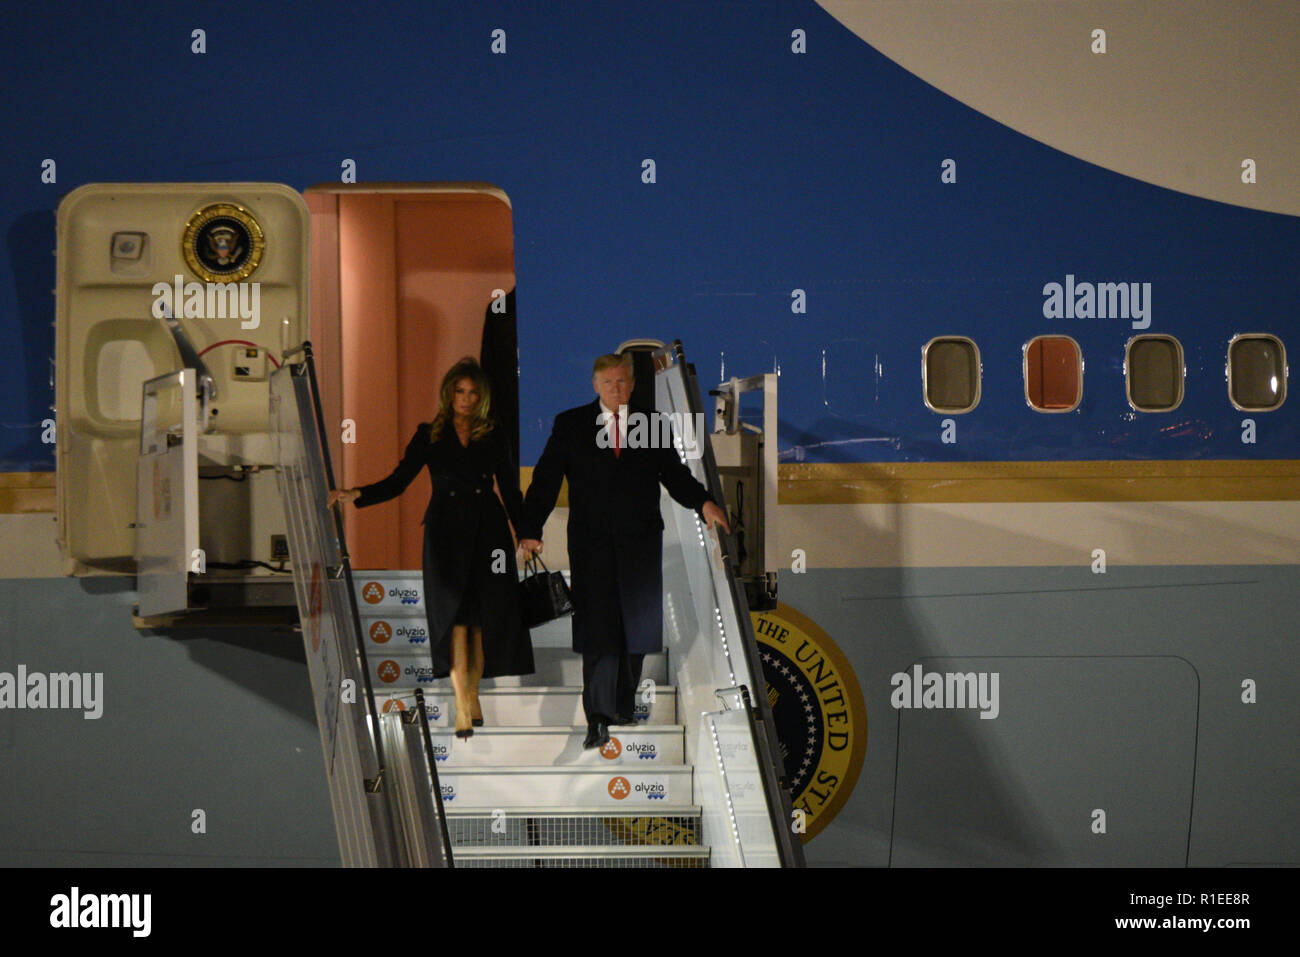 November 09, 2018 - Paris, France: US President Donald Trump and his wife Melania leave US Air Force One after their arrival in the airport of Paris Orly. Le president americain Donald Trump et son epouse Melania descendent de l'Air Force One a leur arrivee a l'aeroport d'Orly. *** FRANCE OUT / NO SALES TO FRENCH MEDIA *** Stock Photo